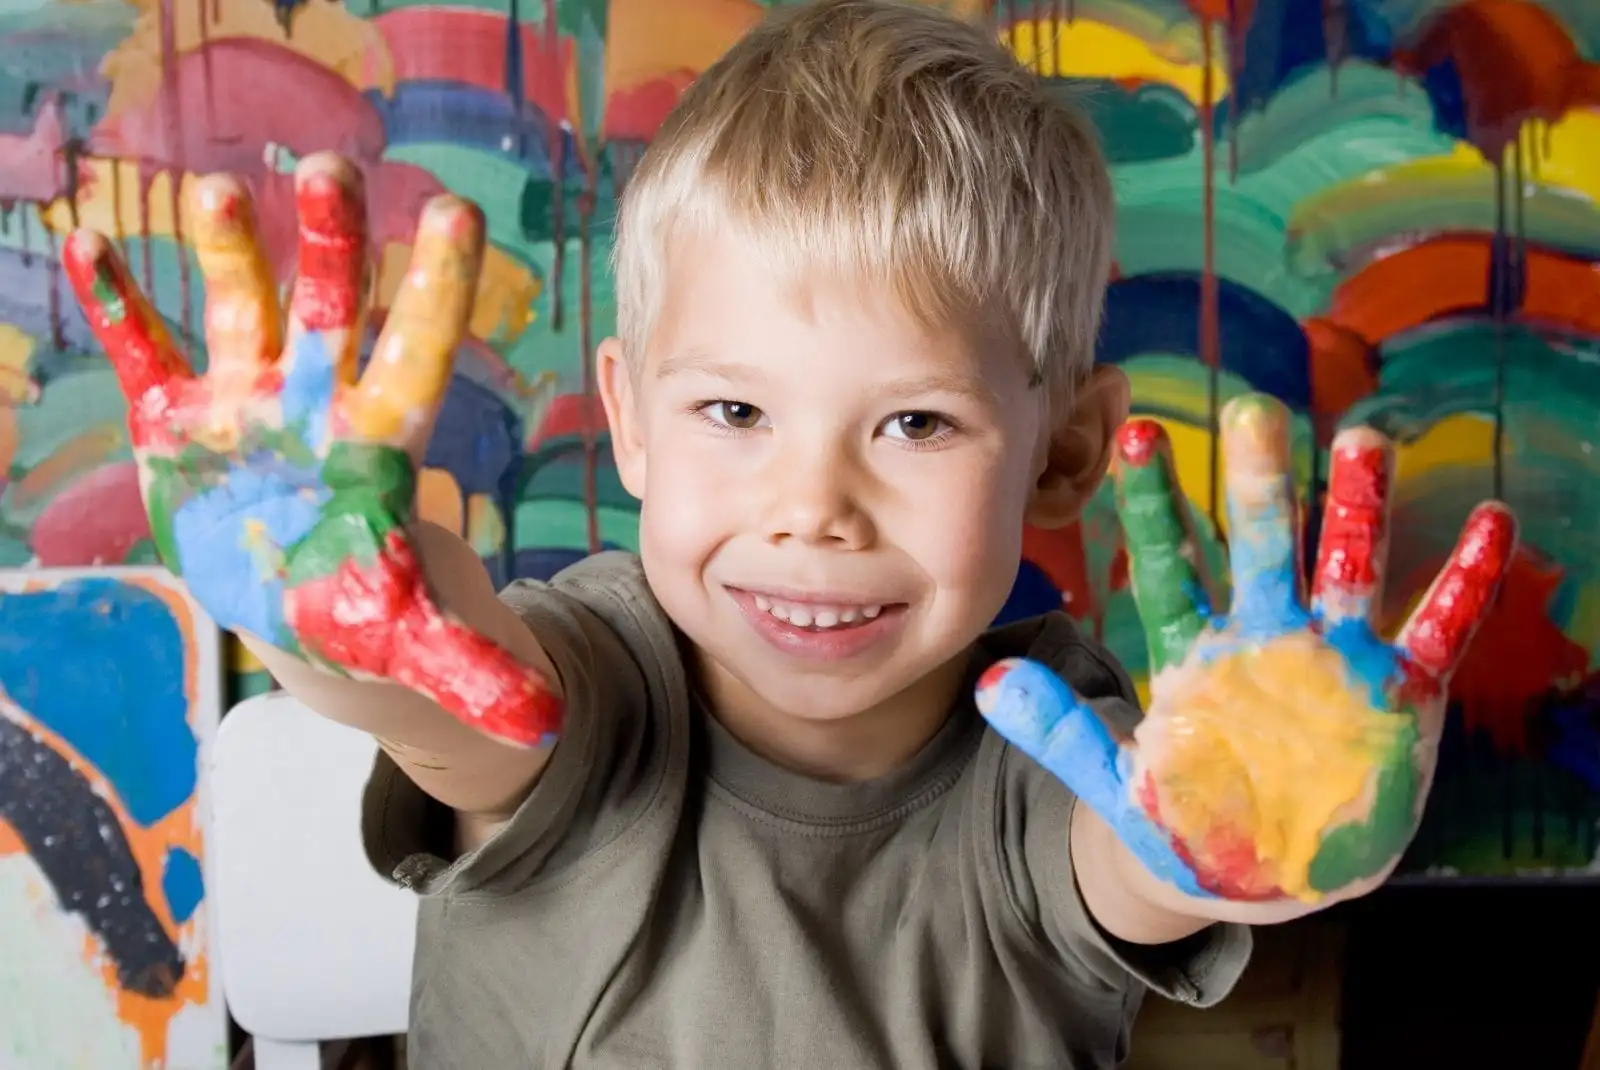 Boy-with-paint-on-hands